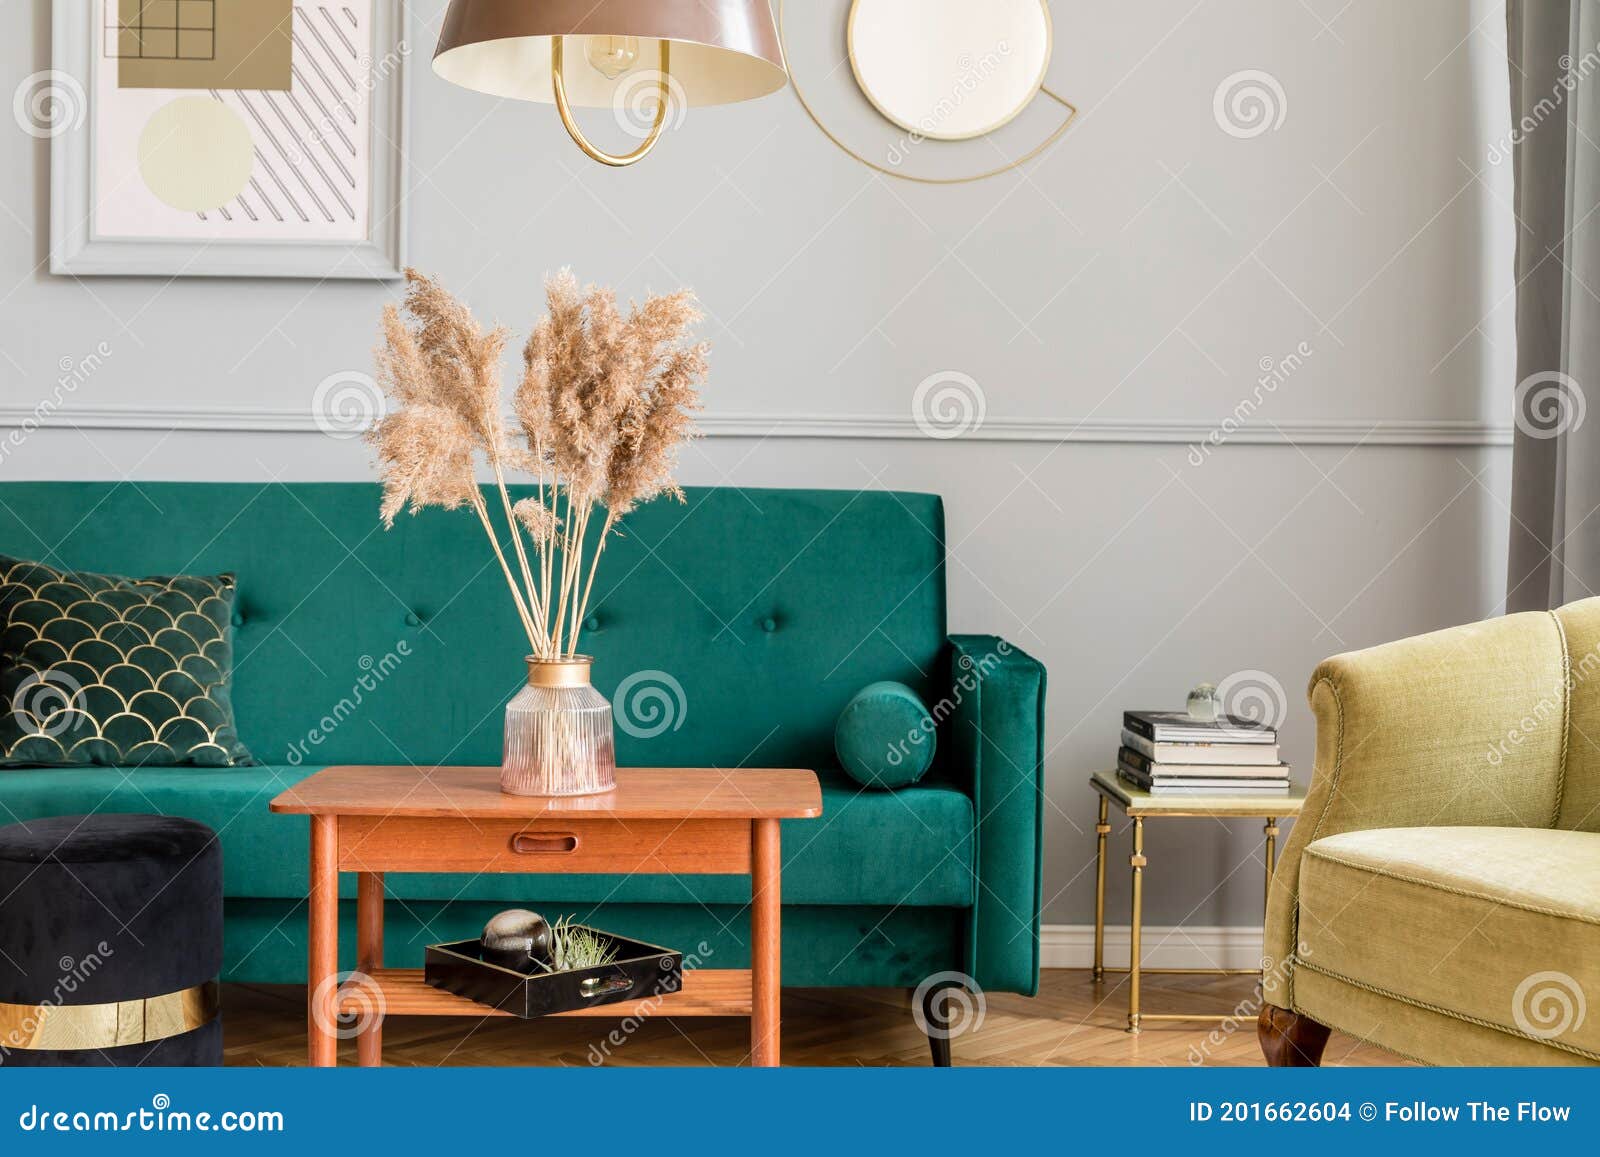 Stylish and luxury living room interior with elegant green velvet armchair, sofa, mock up poster and decoration. Stylish and luxury living room interior with elegant green velvet armchair, sofa, coffee table, marble stands, design lamps, art paintings and chic accessories in home decor